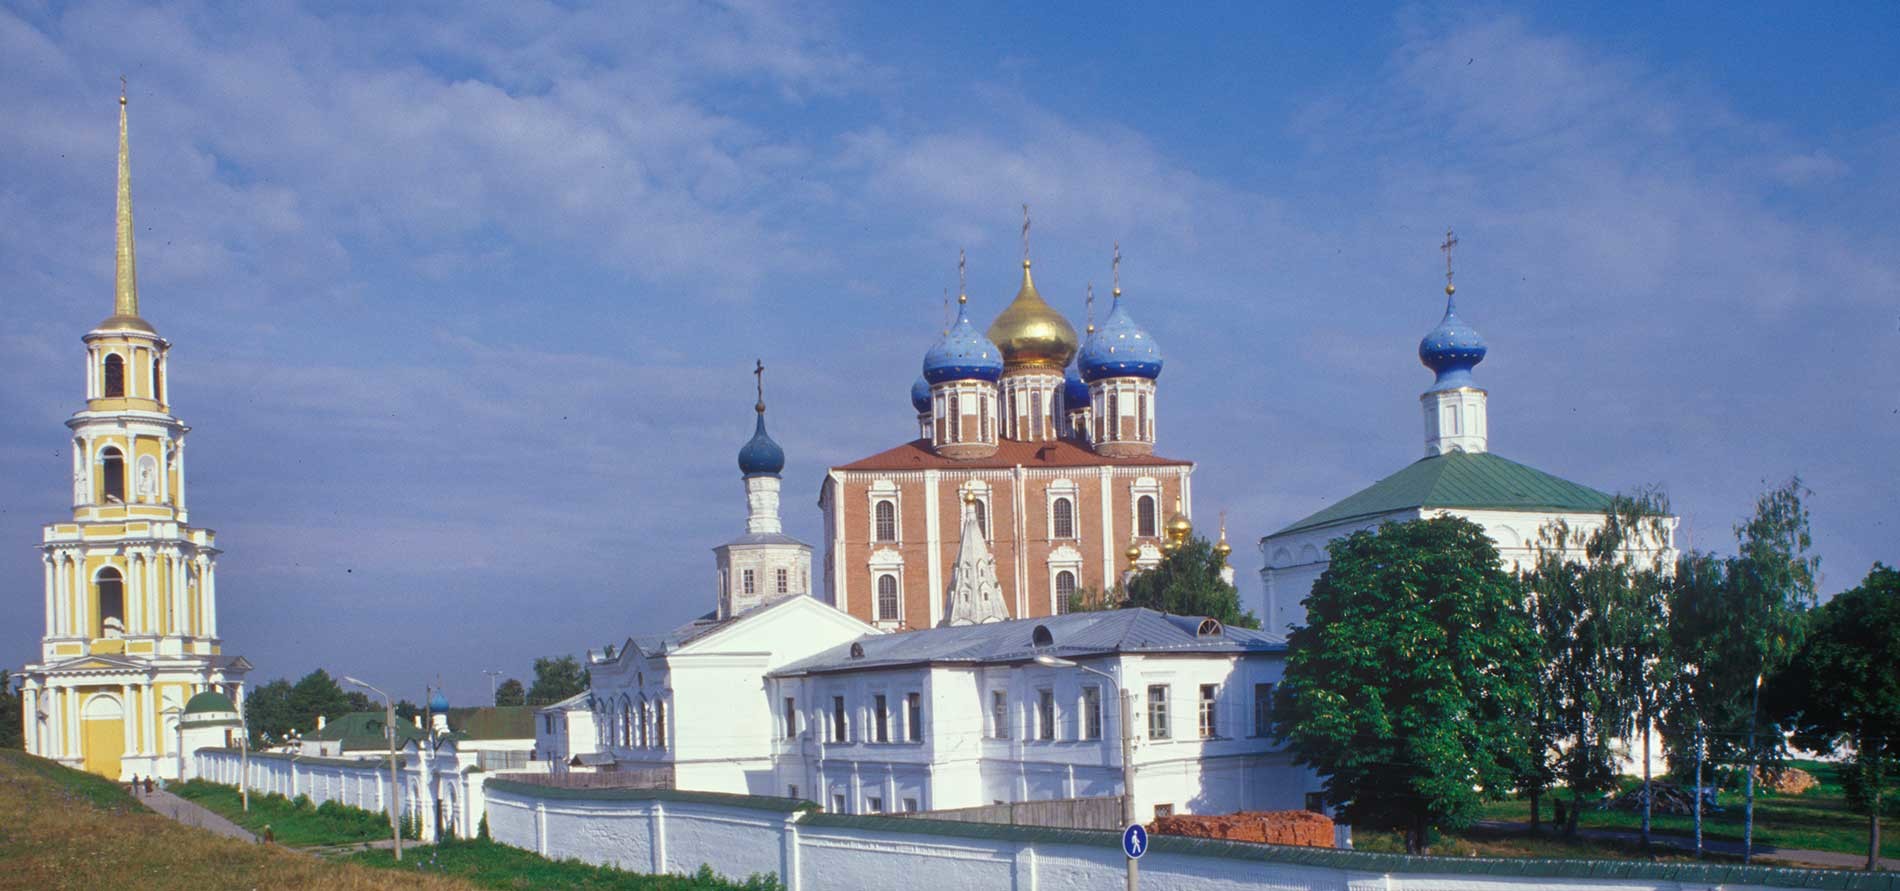 Ryazan Kremlin, south view. Background: Cathedral bell tower, Dormition Cathedral. Foreground: wall of Transfiguration Monastery with West Gate&Church of St. John, Transfiguration Cathedral (right). Aug. 28, 2005.